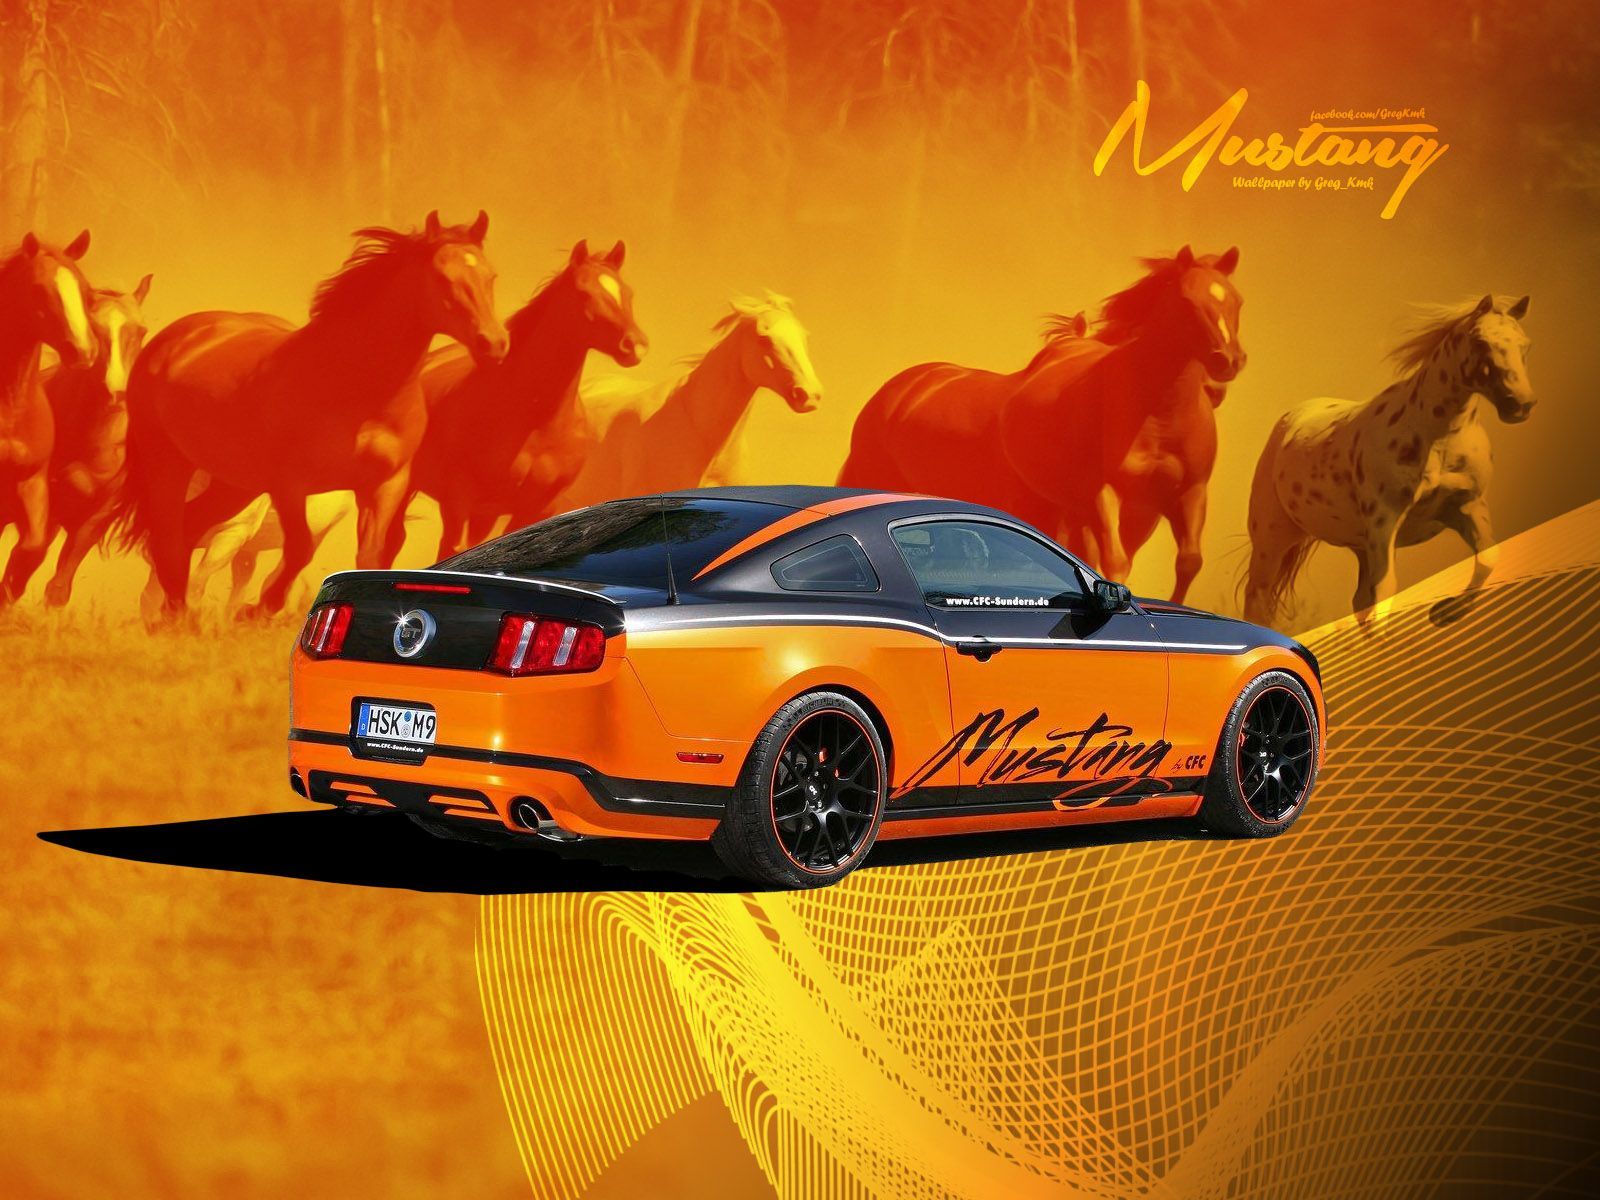 Ford-Mustang Wallpaper | 1600x1200 | ID:32930